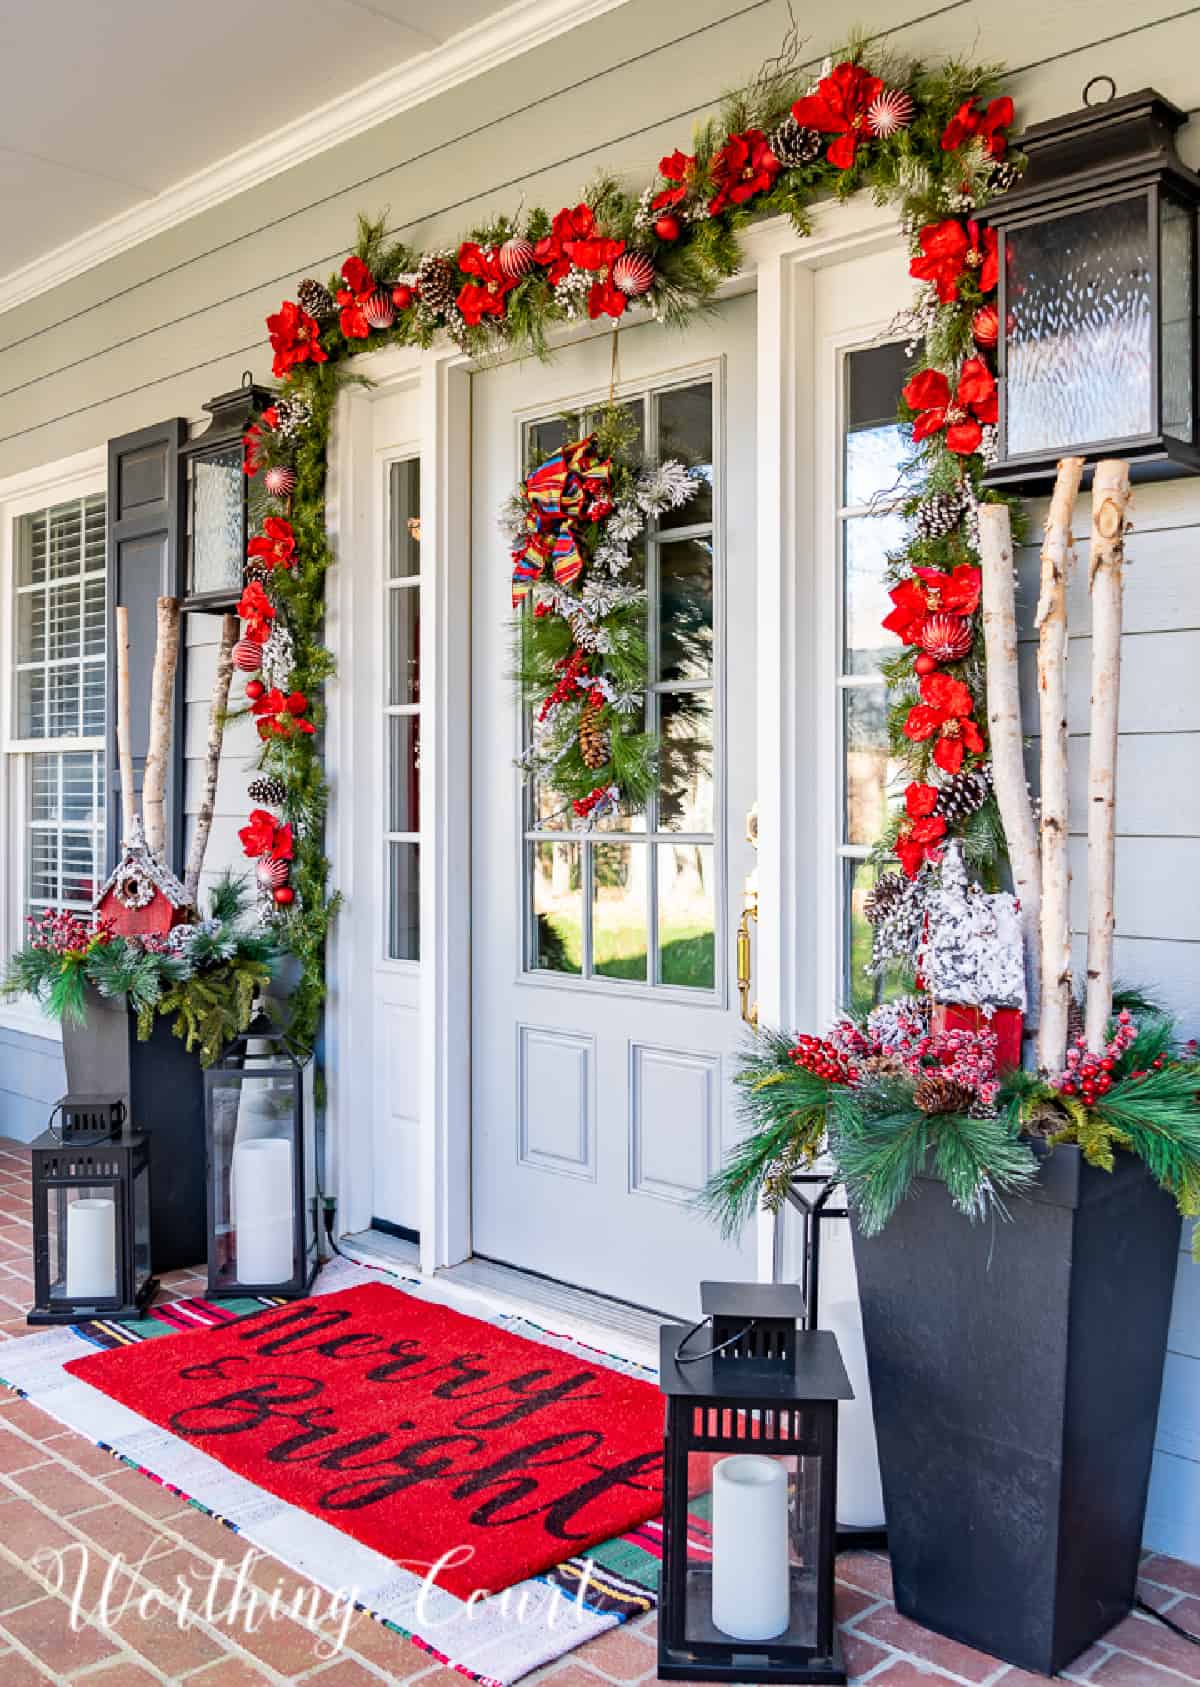 5 Tips to Welcome Holiday Guests - DIY Beautify - Creating Beauty at Home